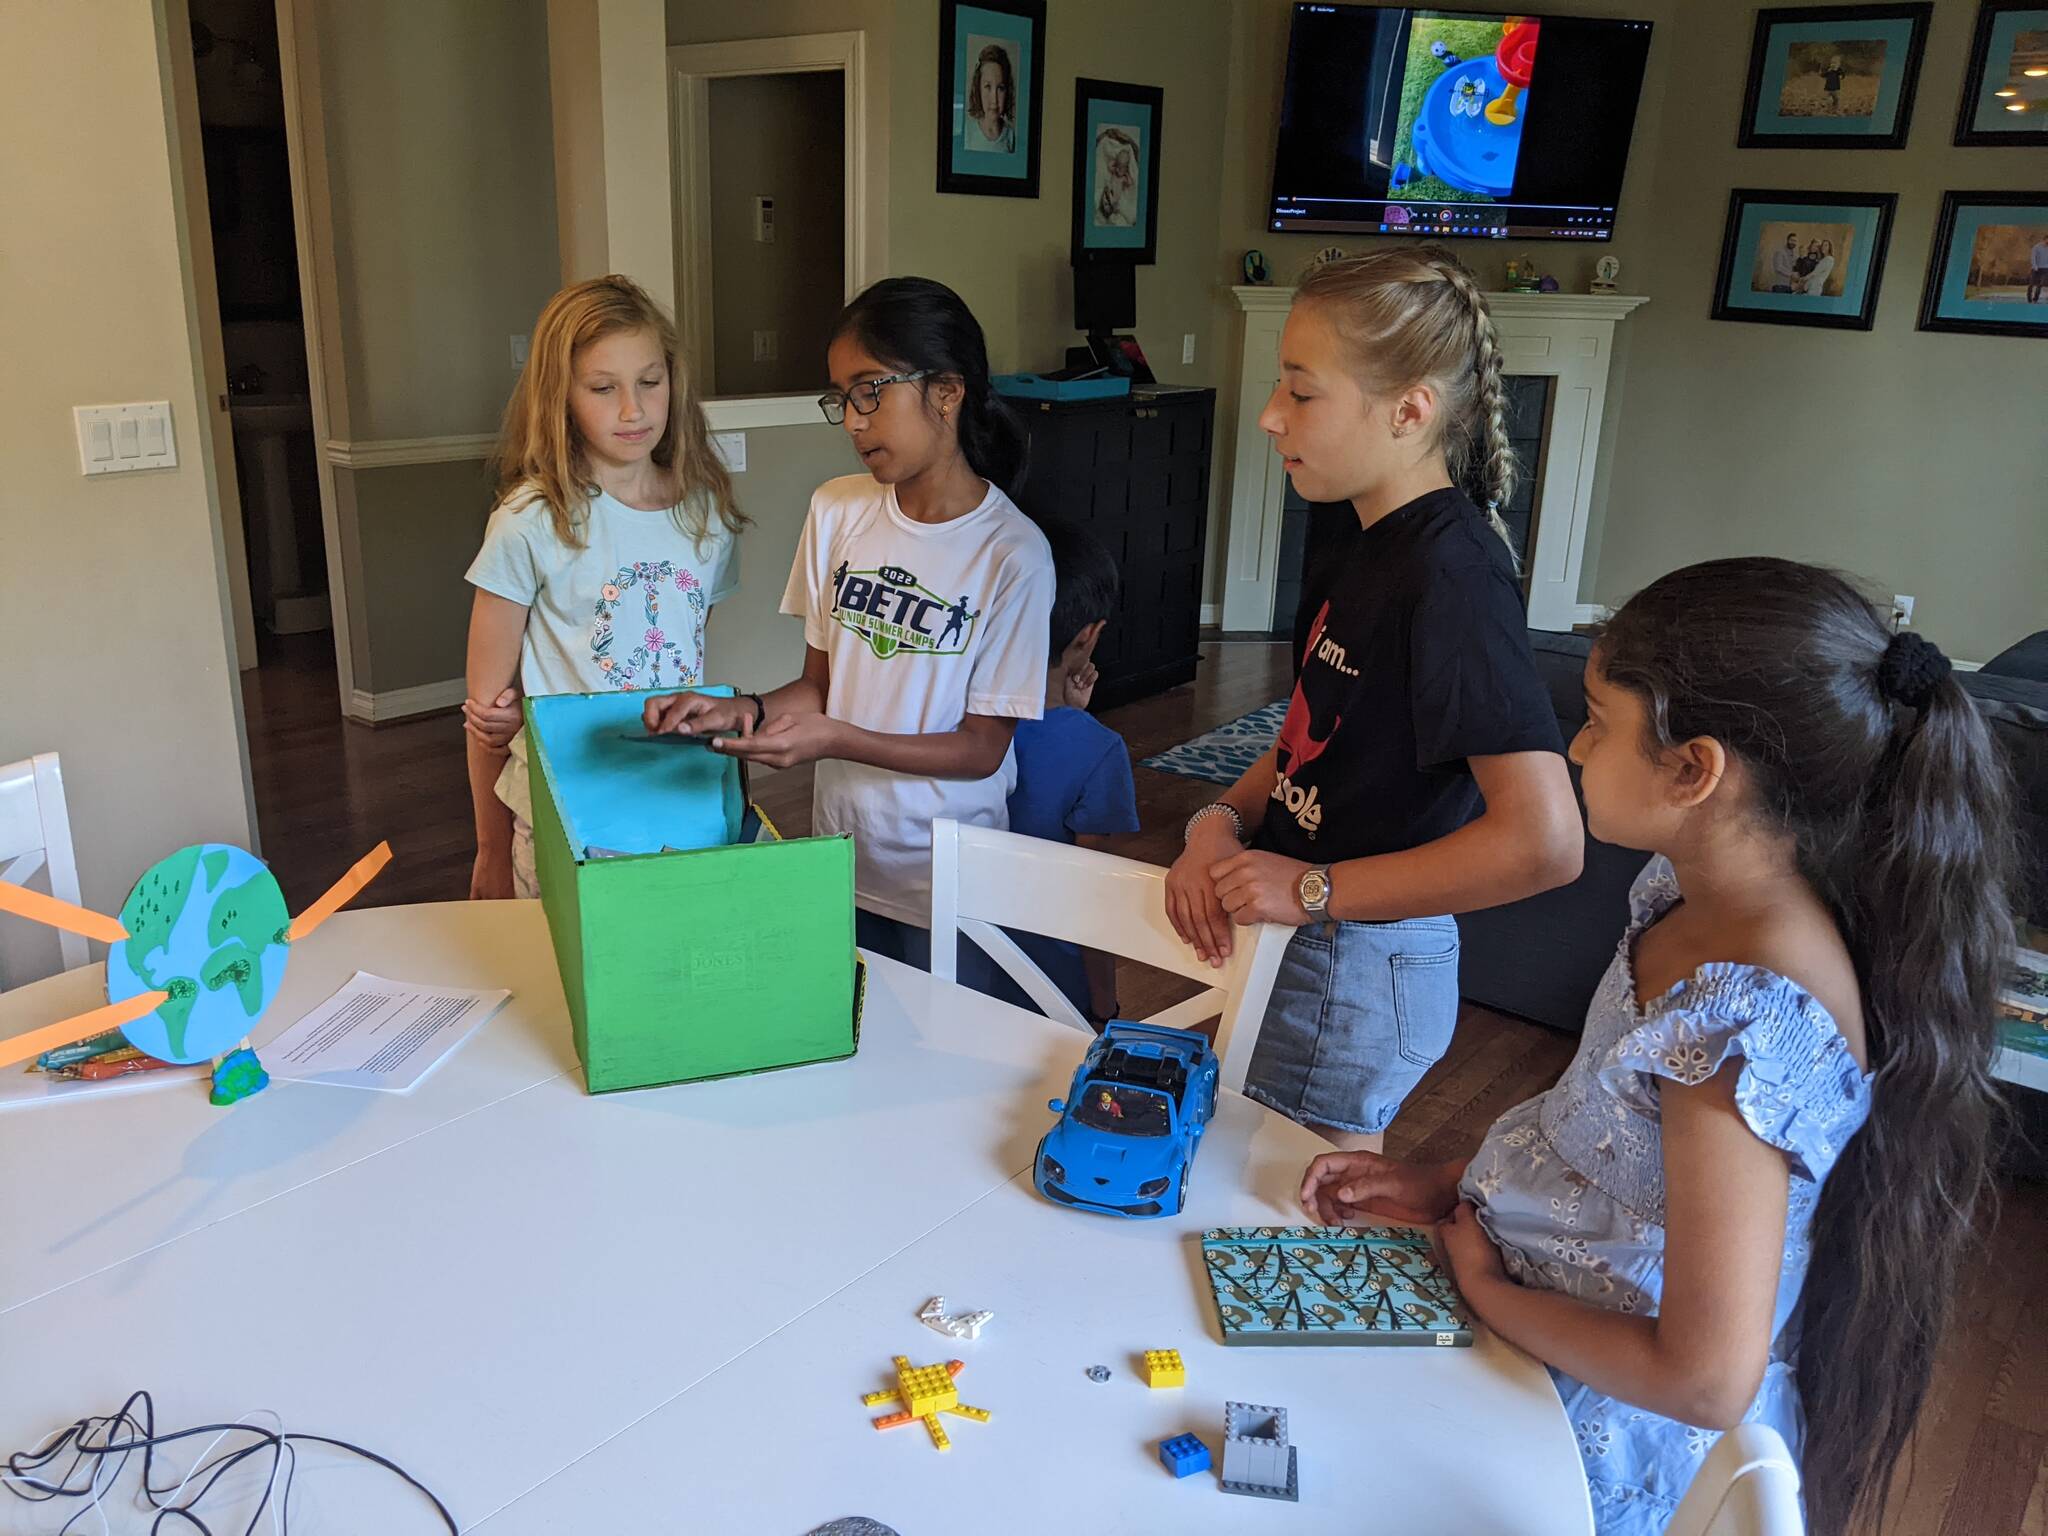 Photo courtesy of Julia Fishler
At the Kids Save The Earth event, Neha shows everyone the model for her litter-gathering robot. From left to right, Milla, Neha, Rohit, Callie and Dinaaz.